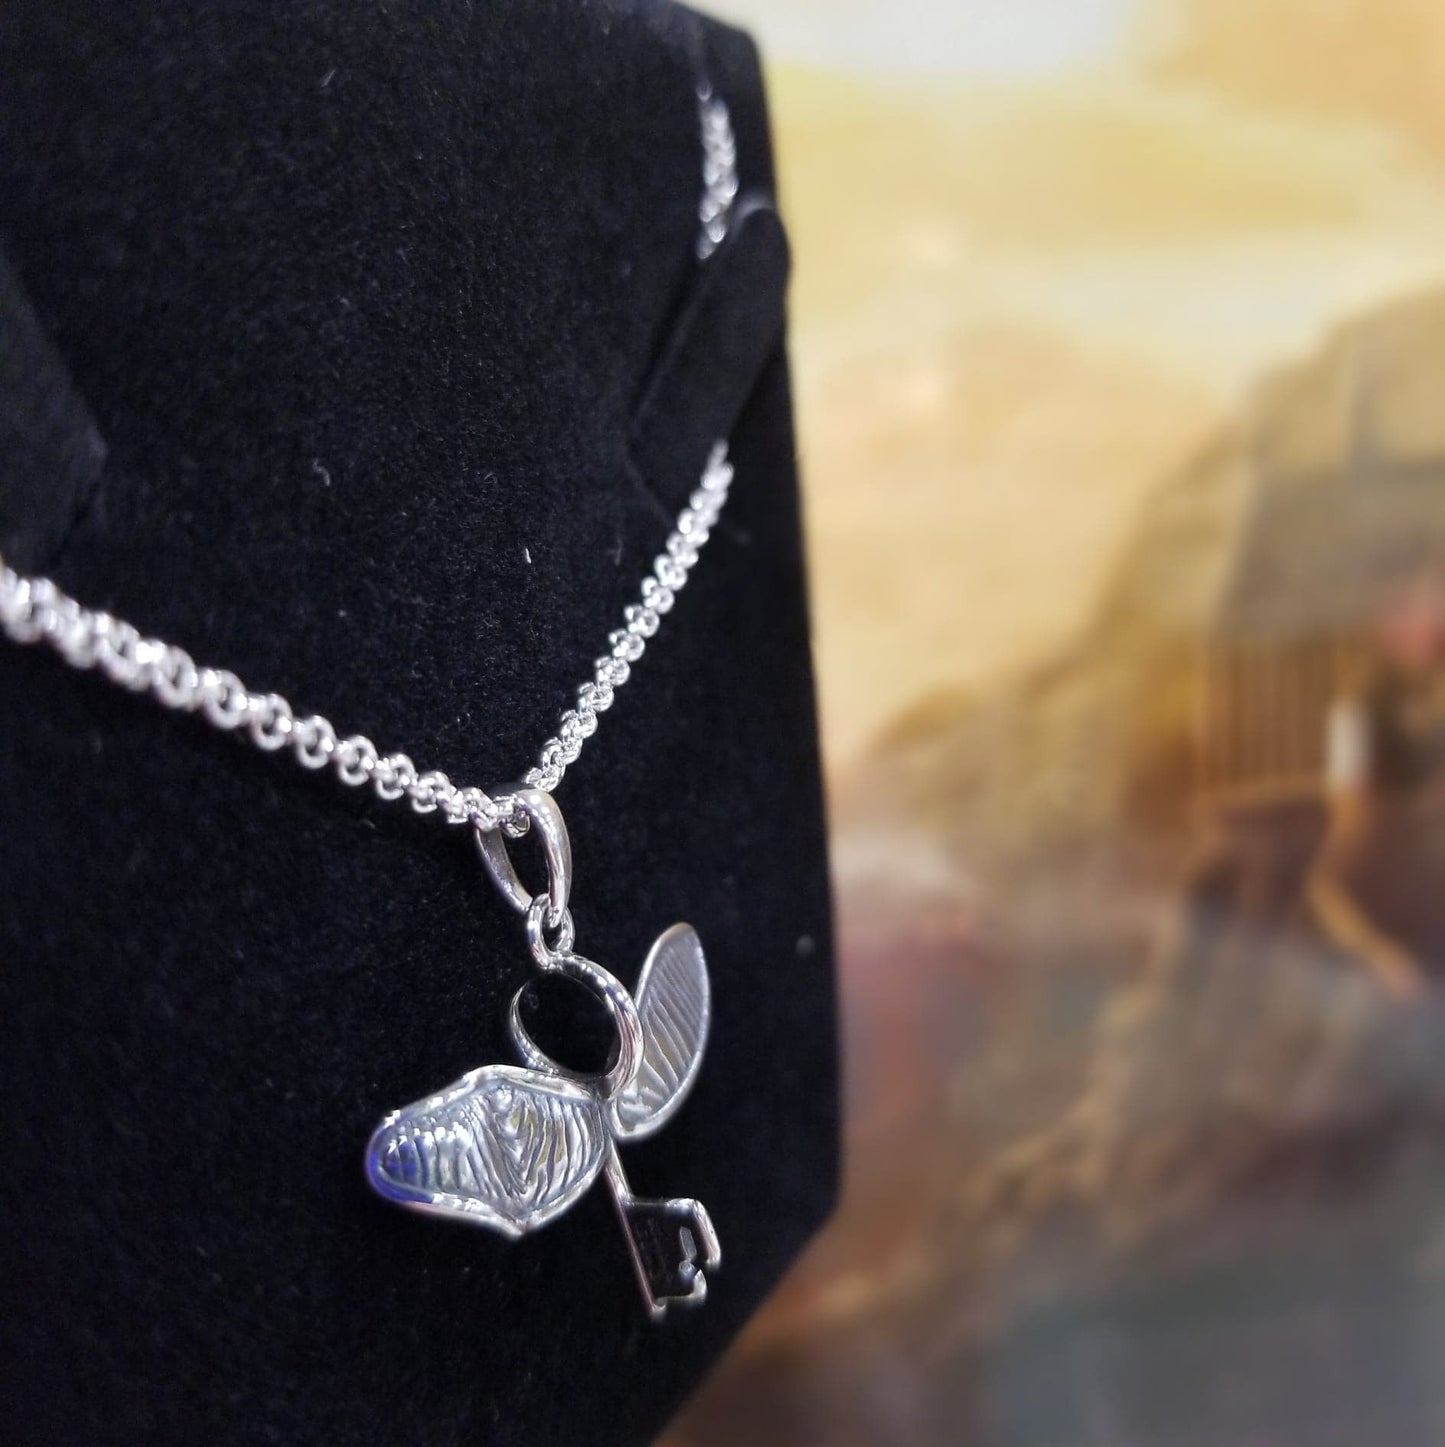 Harry Potter Flying Key with a Broken Wing Necklace Sterling Silver